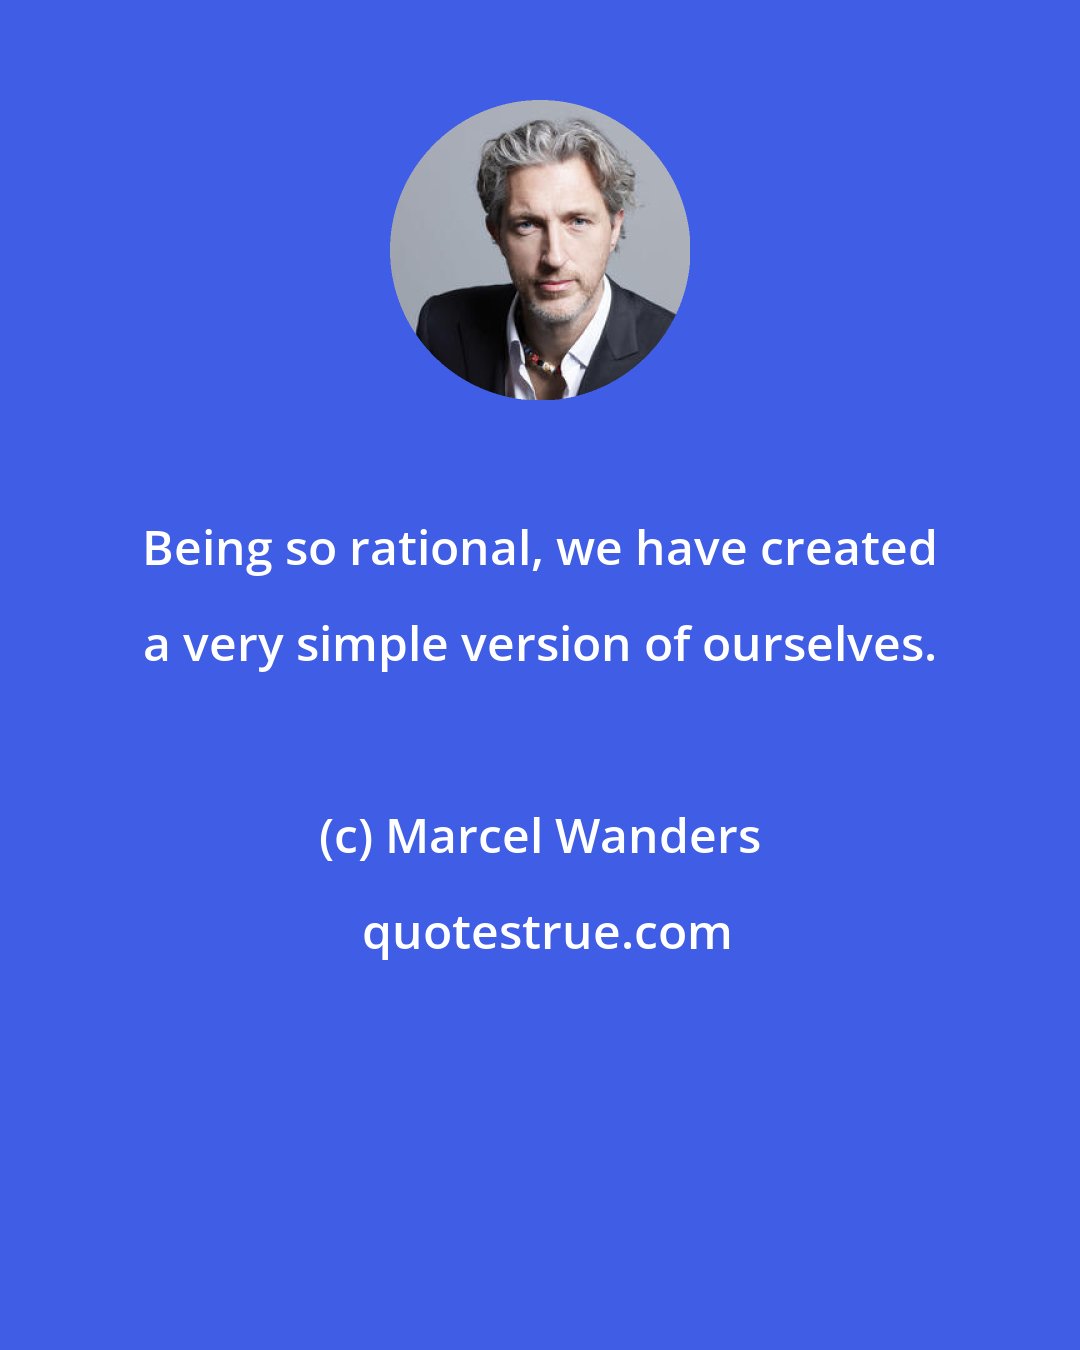 Marcel Wanders: Being so rational, we have created a very simple version of ourselves.